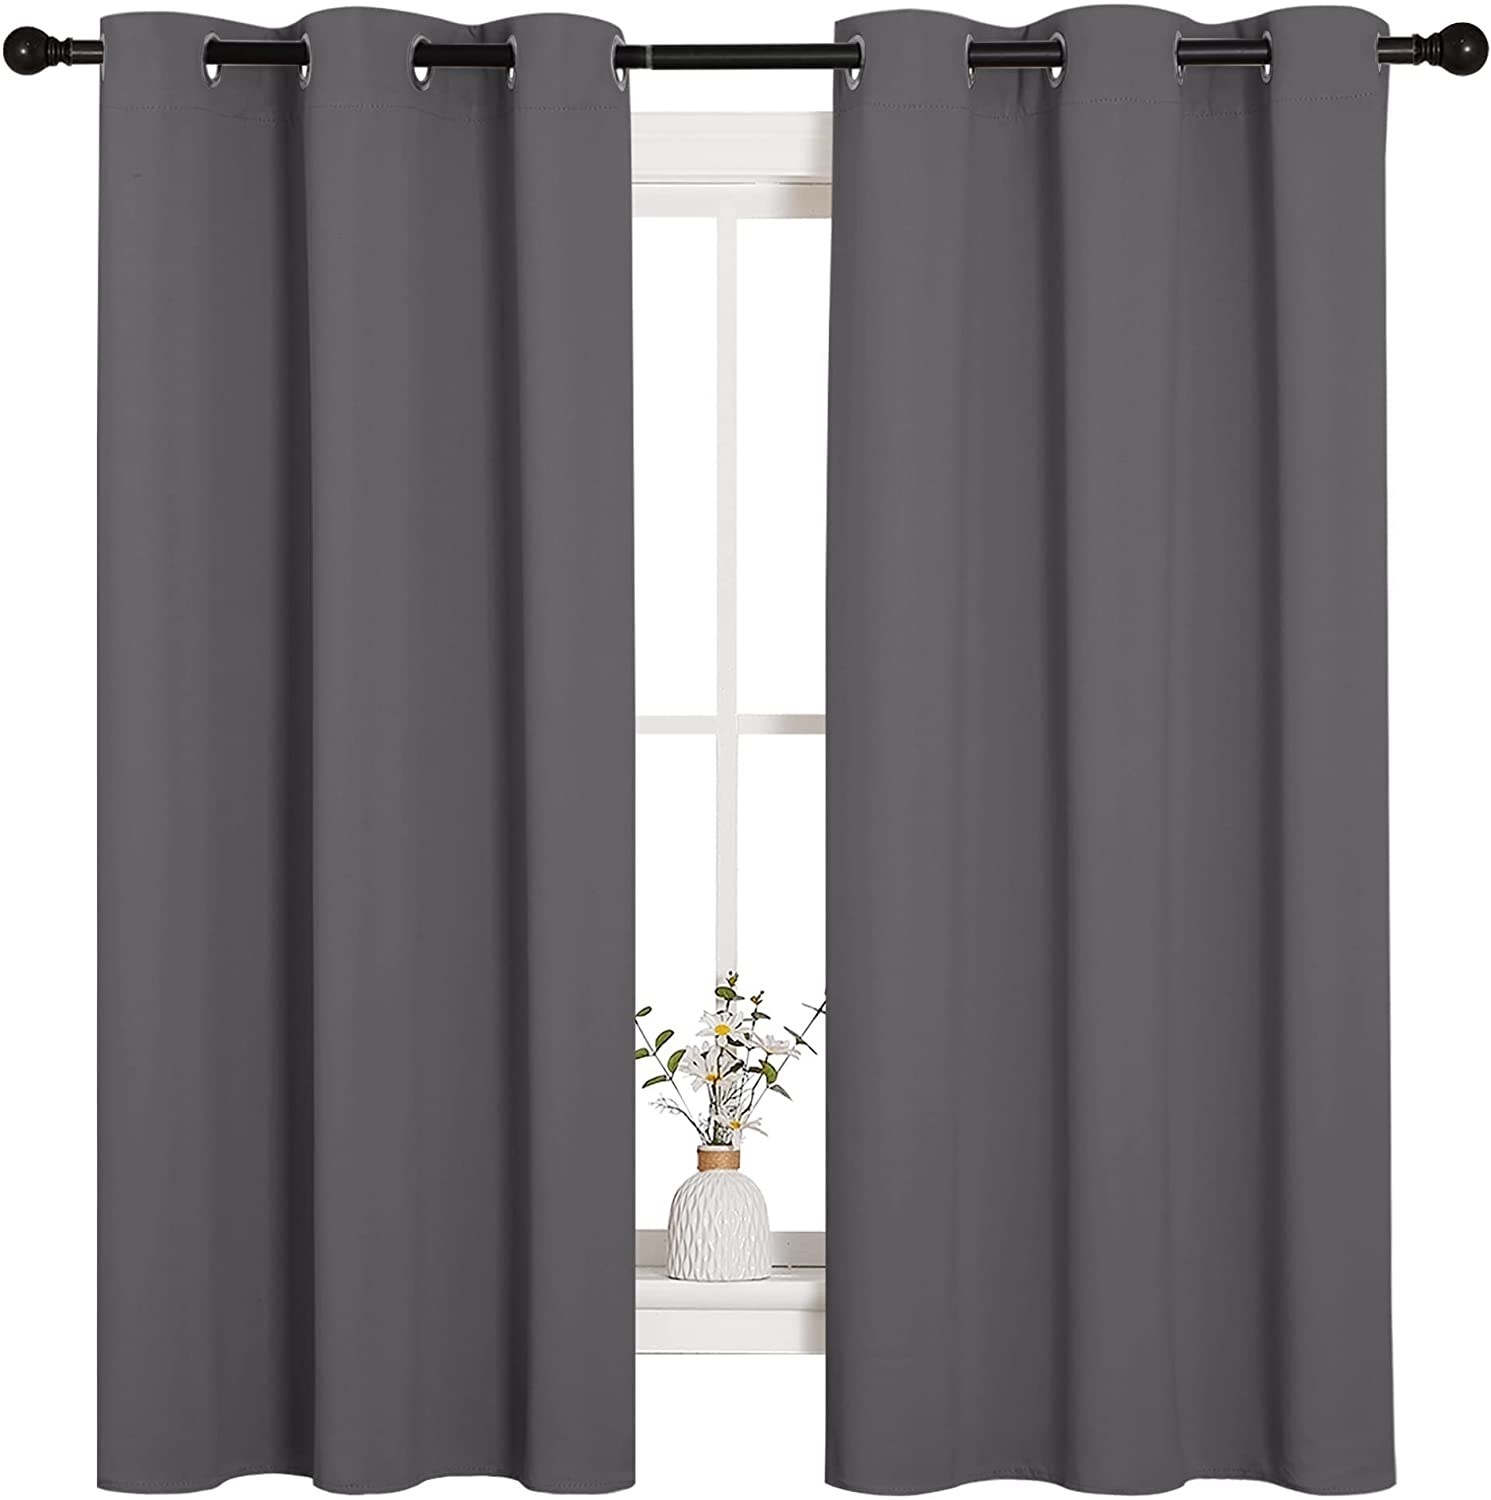 A set of curtains on a plain window with a vase of flowers in the middle